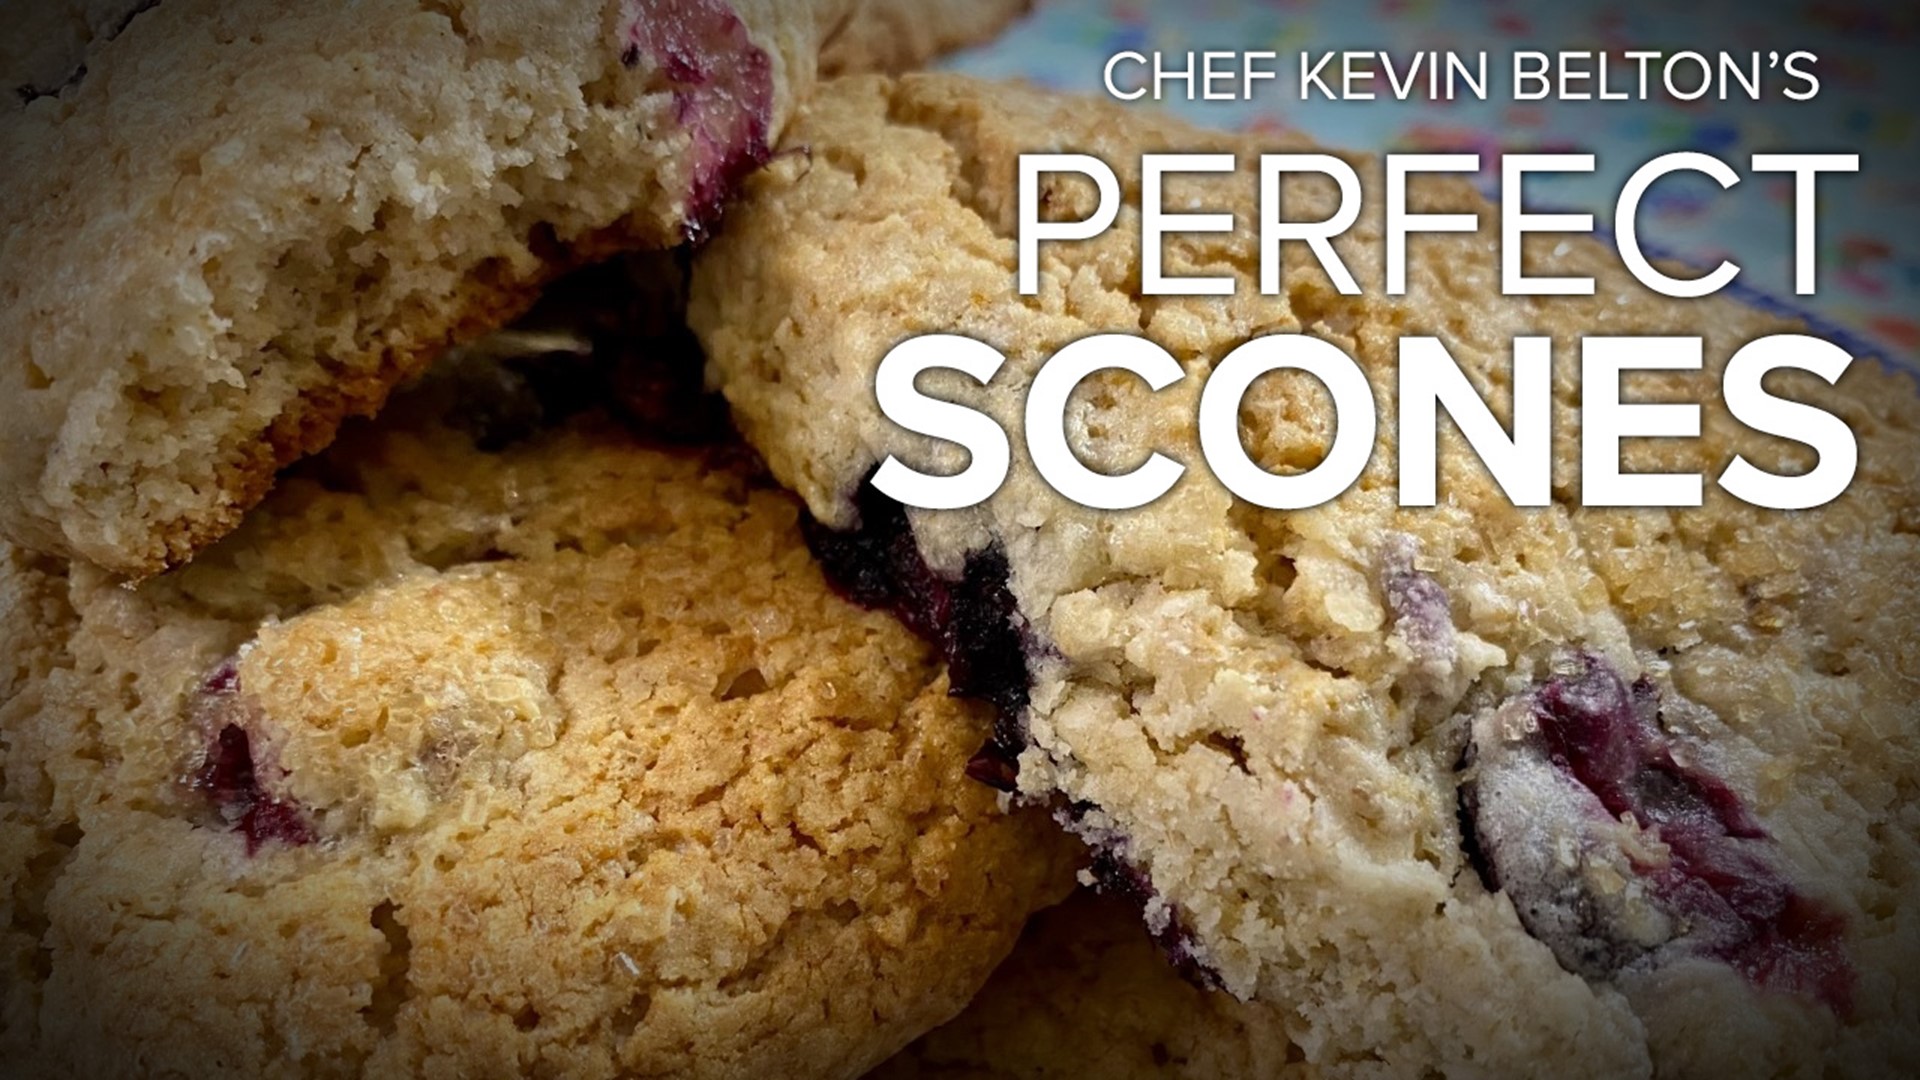 The key ingredient in these scones is oat flour! We're mixing it with our all-purpose flour to give these scones a taste and texture you'll love.